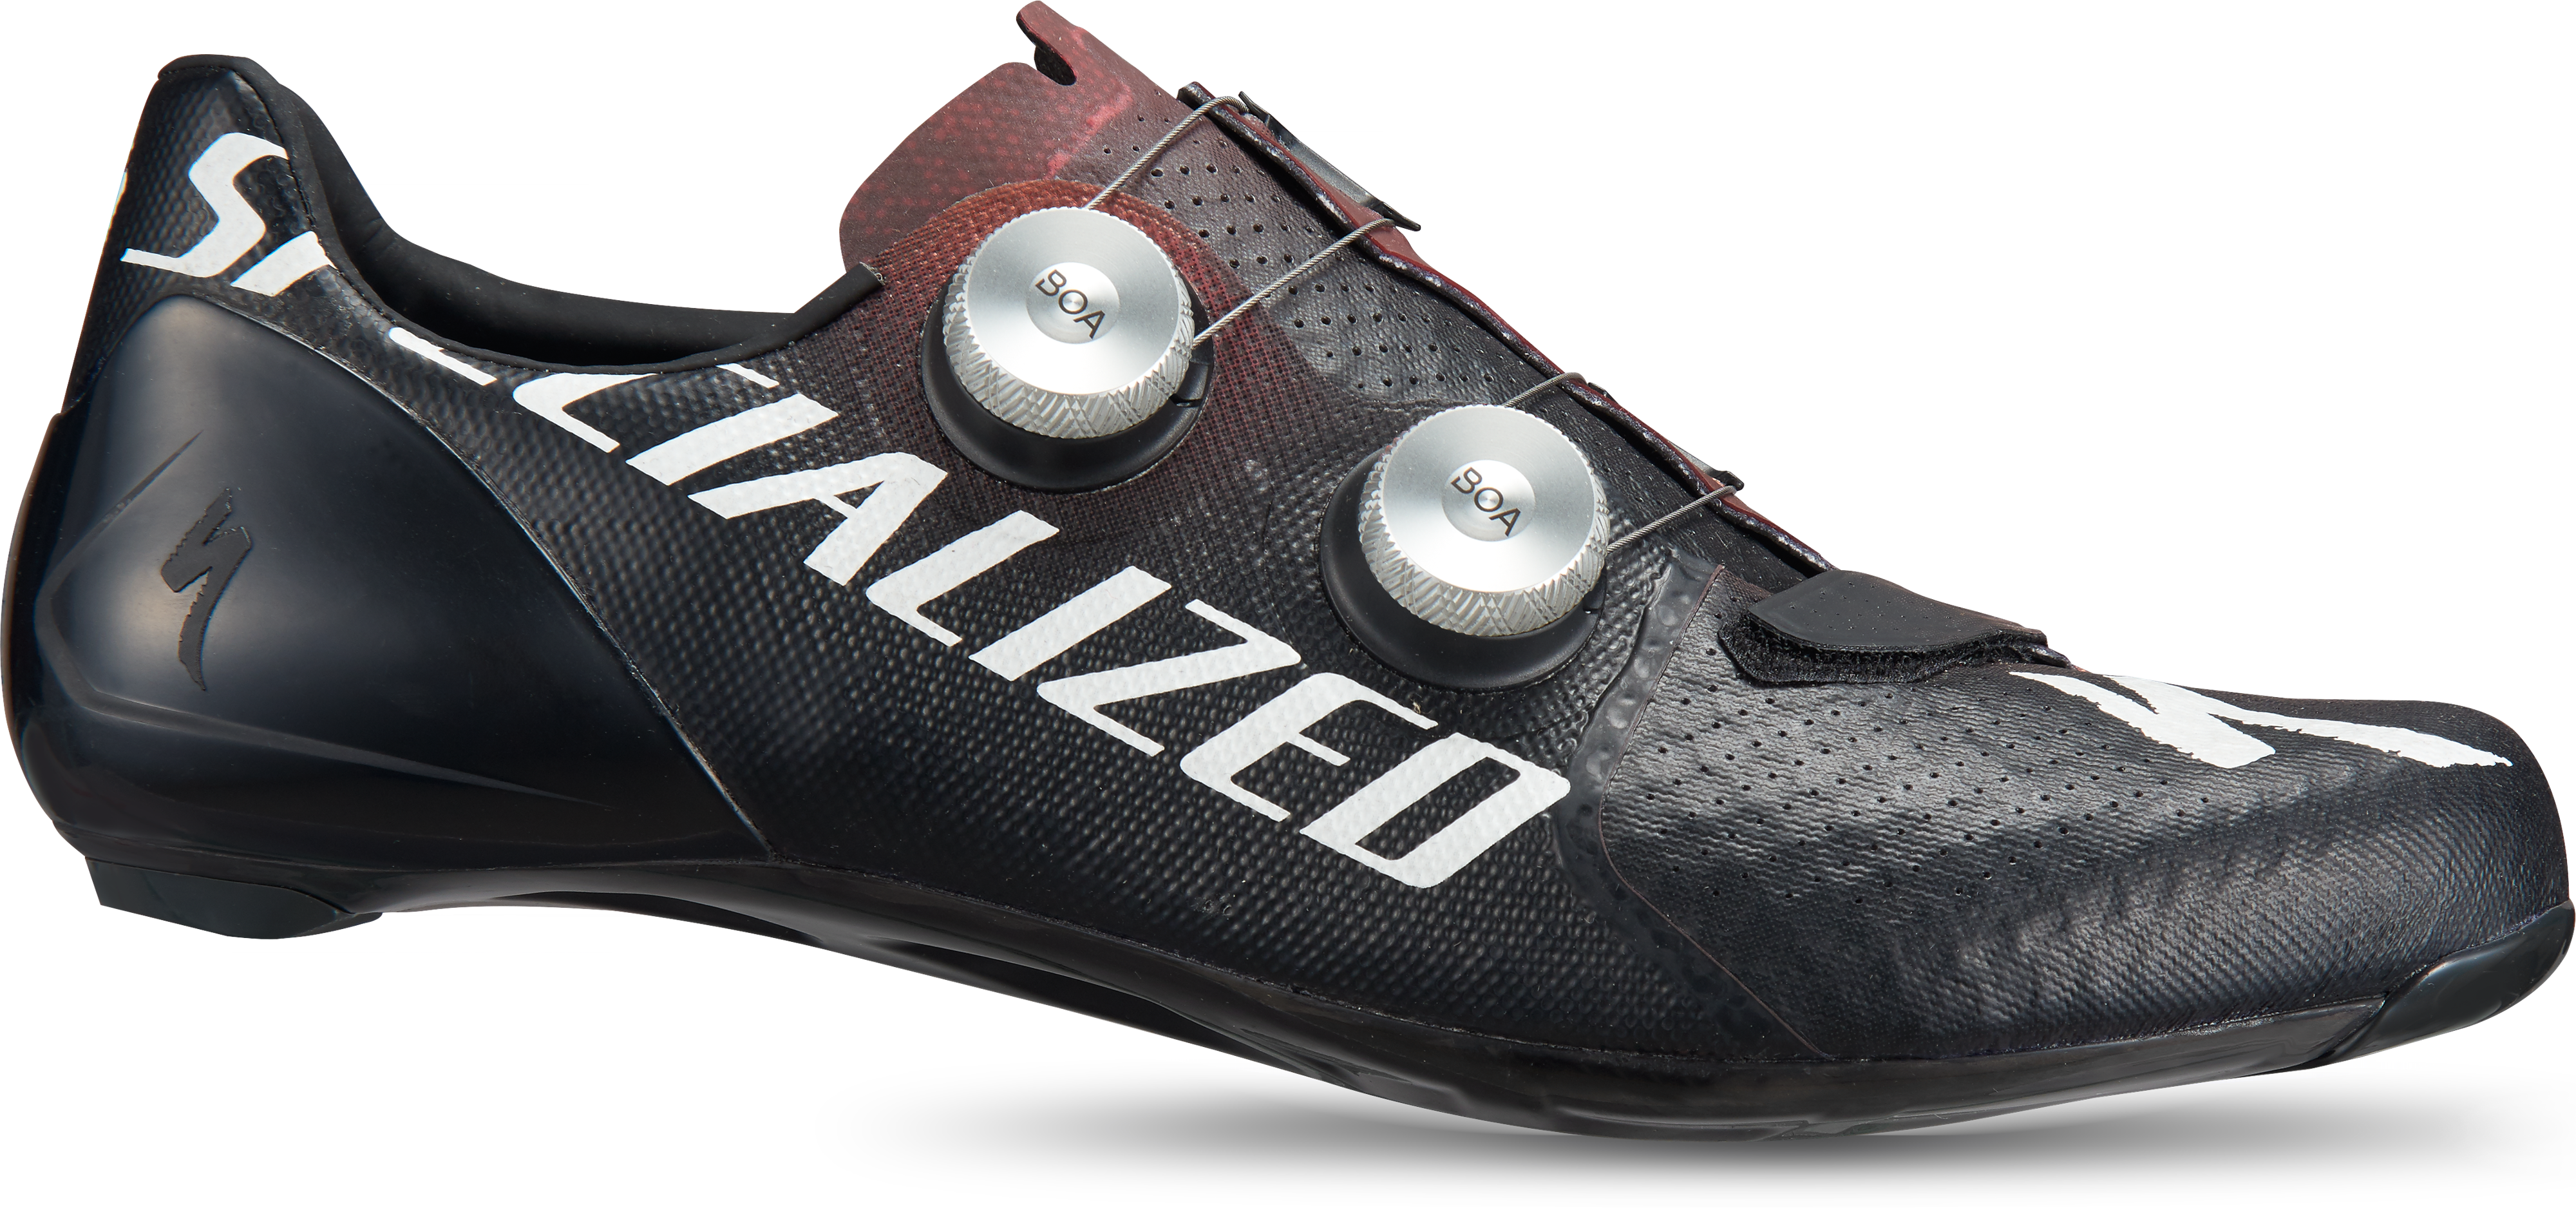 S-WORKS 7 ROAD SHOES SPEED OF LIGHT LTD 40(40 (25.5cm) Speed of